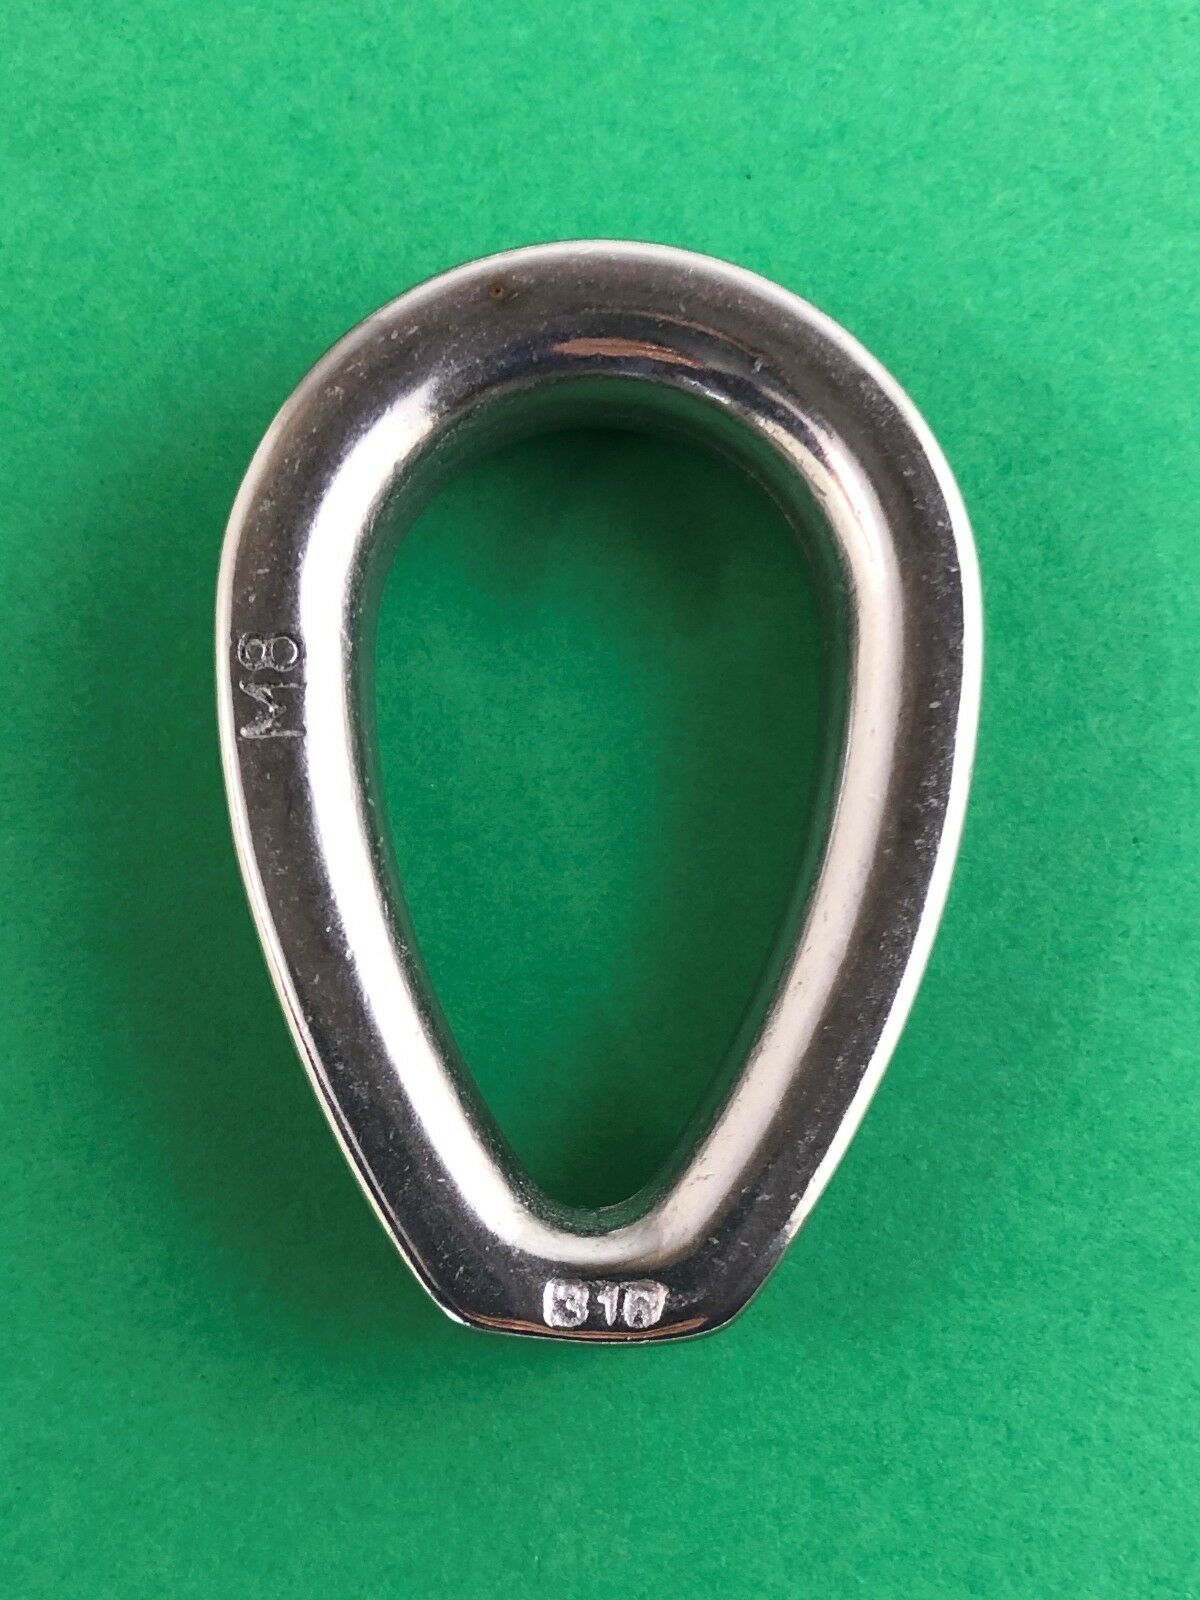 Stainless Steel 316 Wire Rope Thimble Casting With Closed End 5/16" (8mm) Marine